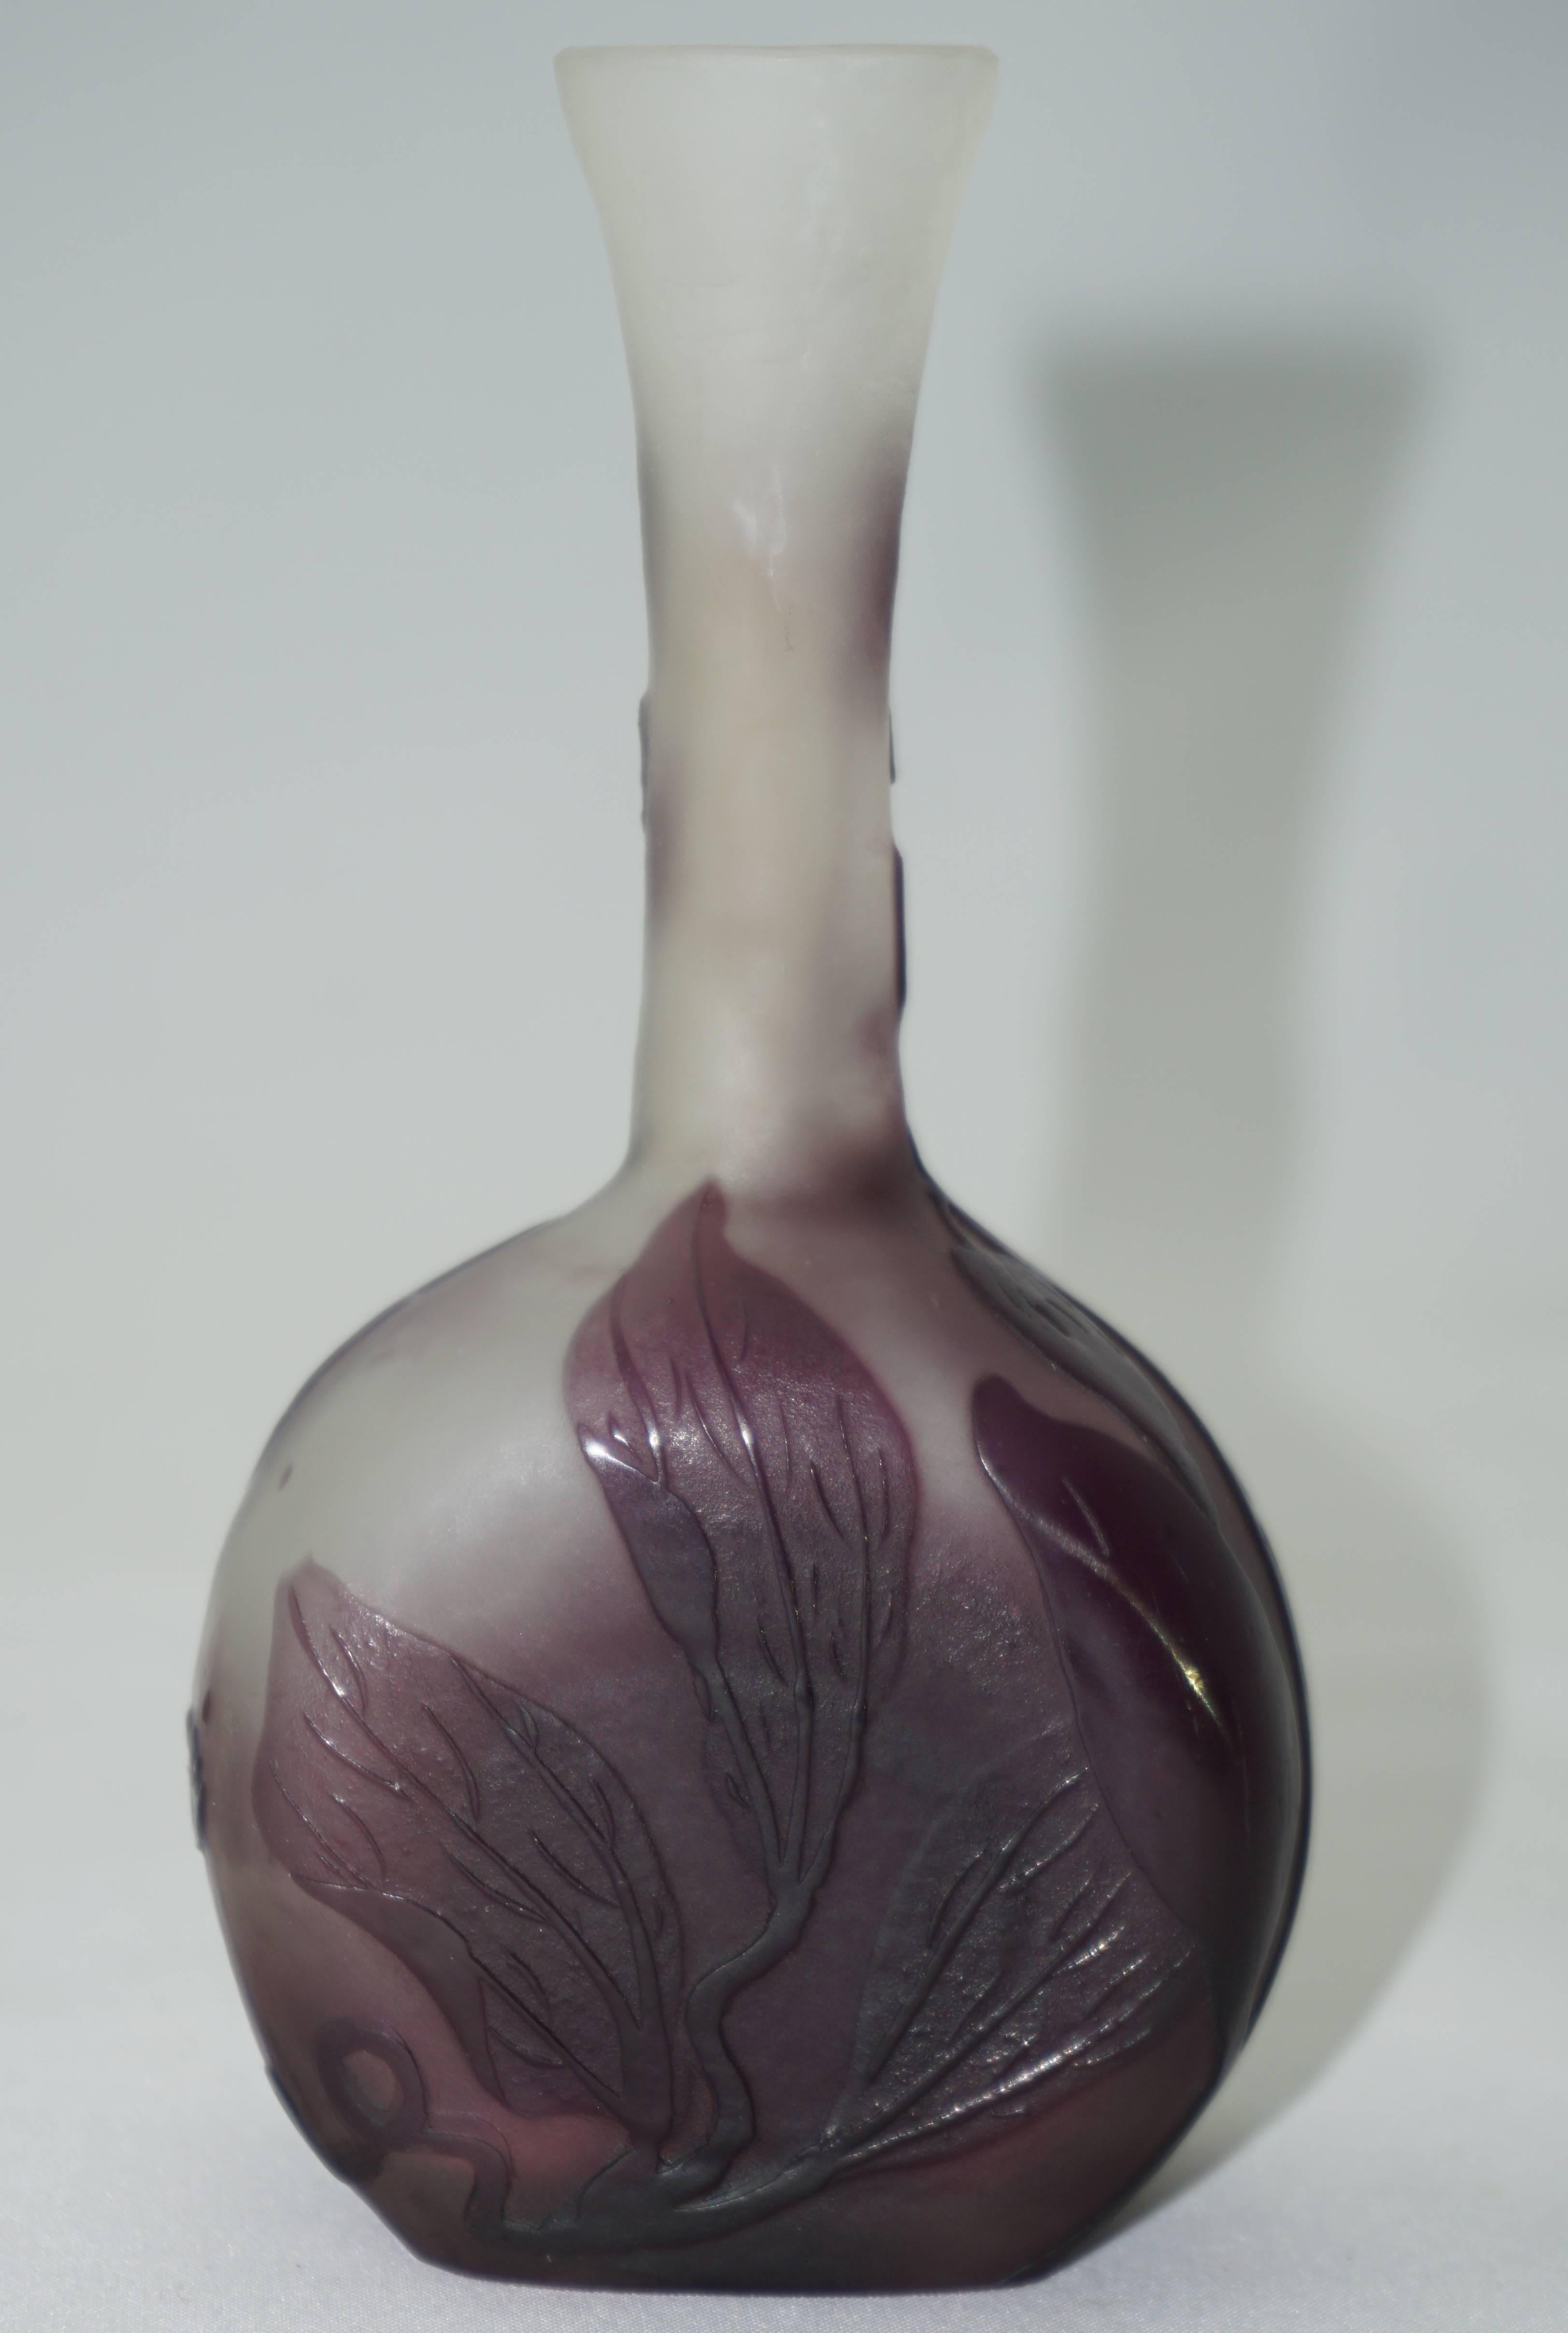 A beautiful Emile Galle cameo cabinet vase from Nancy, France, circa 1900. Carved foliage in Lavenders and purples with pinks on a creamy background.

Marked Galle

Measure: Height 5.25
Width 2.75
Depth 1.75

Please consider Avantiques